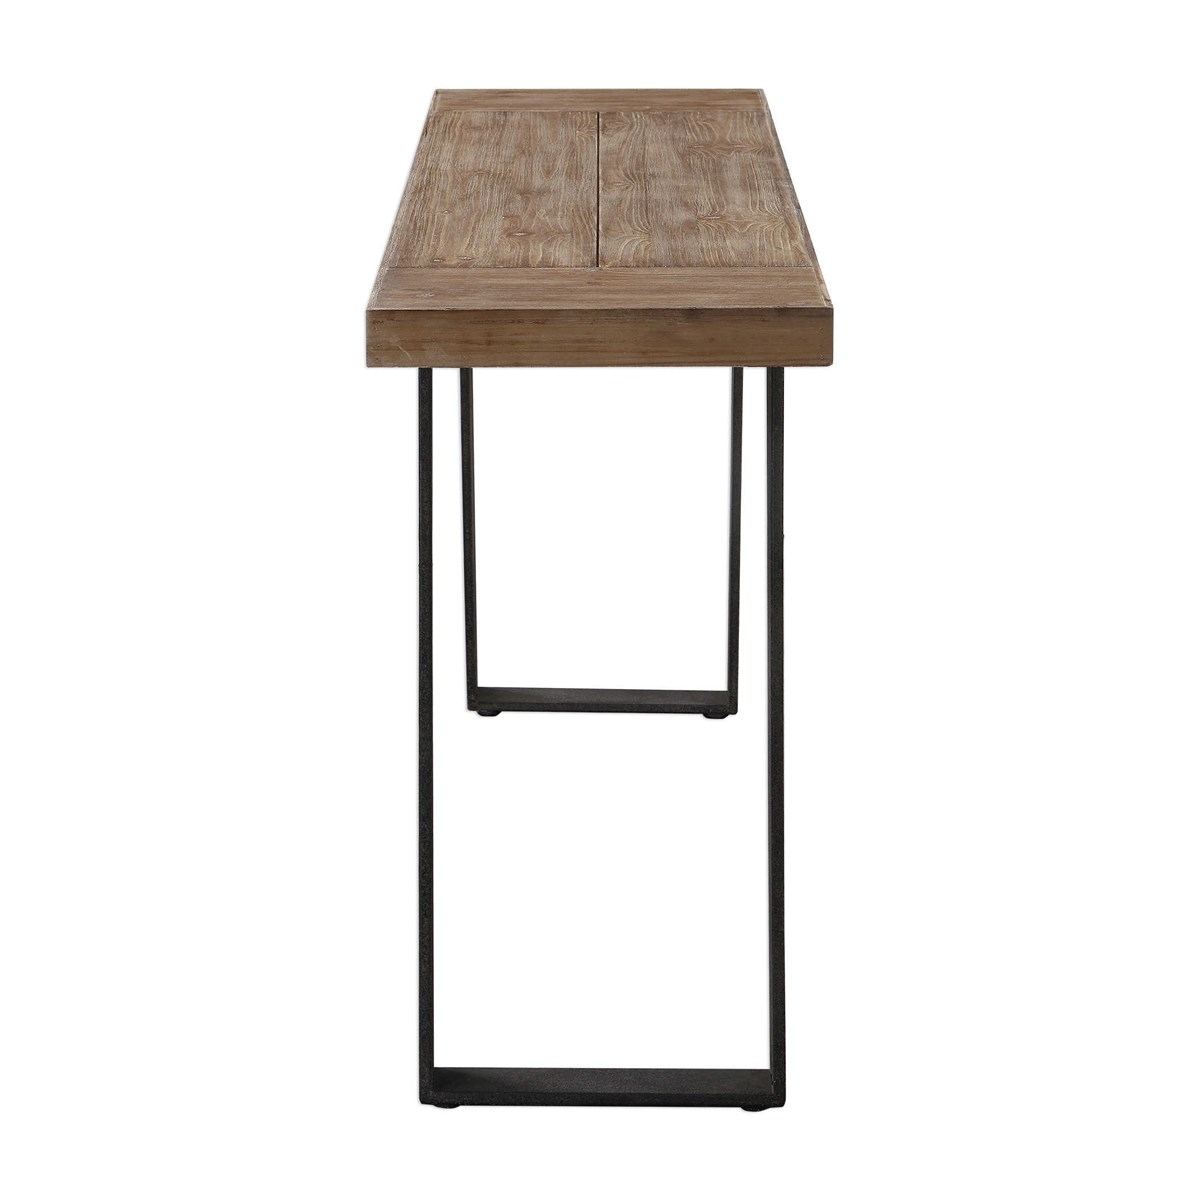 Freddy Console Table - Image 6